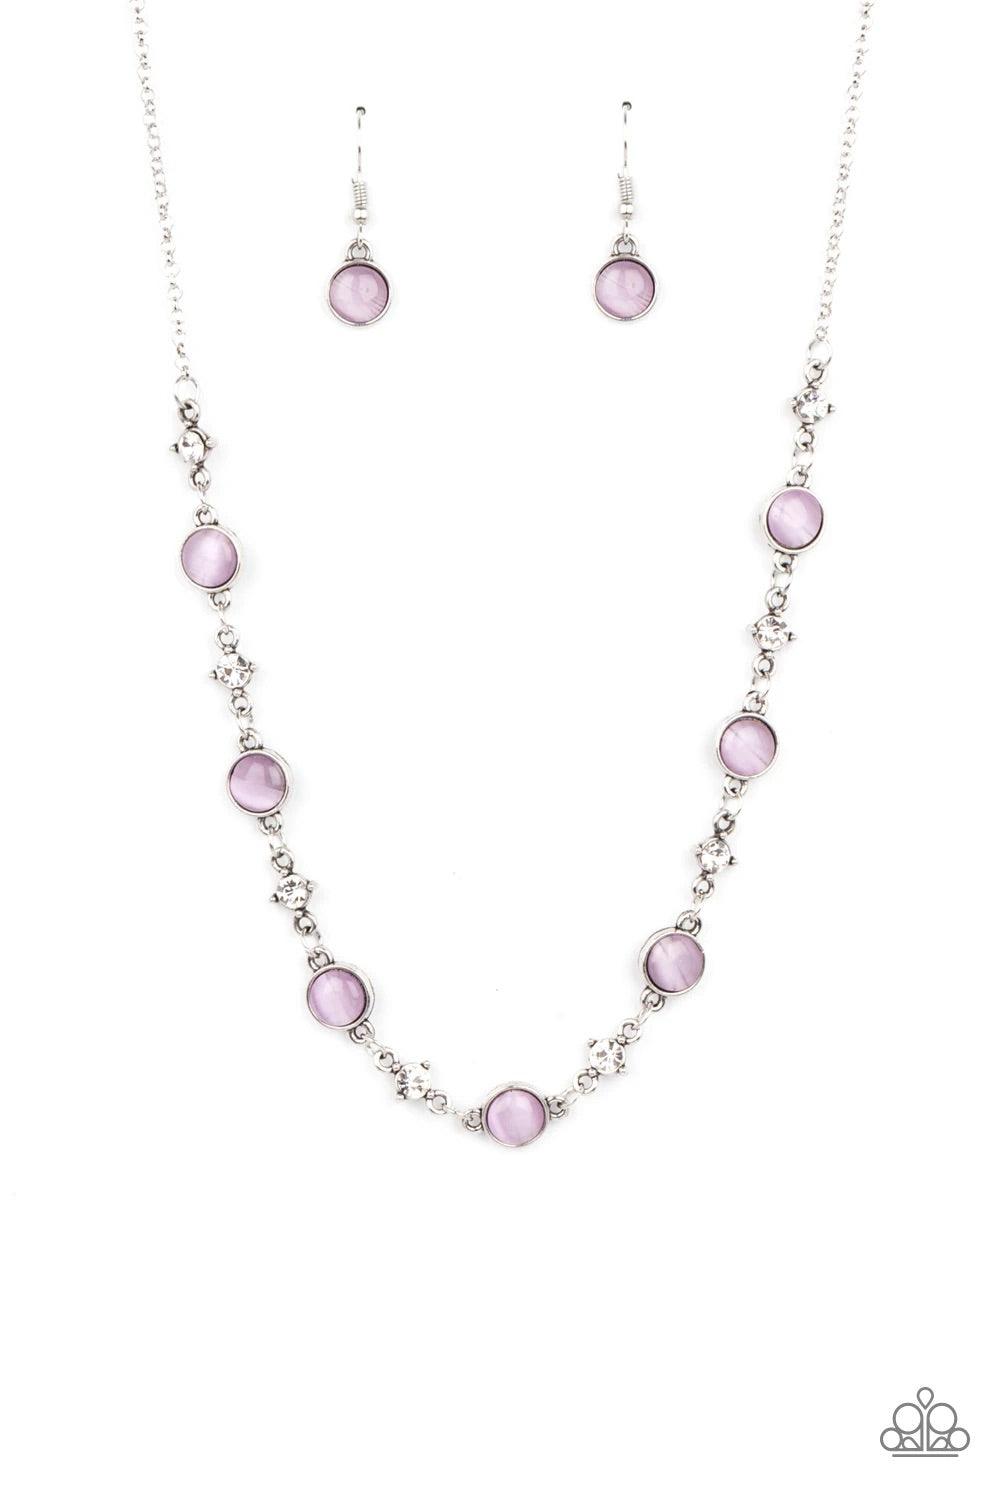 Paparazzi Accessories Inner Illumination - Purple Encased in antiqued silver fittings, dainty white rhinestones and glowing Amethyst Orchid cat's eye stones delicately link below the collar for a timeless finish. Features an adjustable clasp closure. Sold